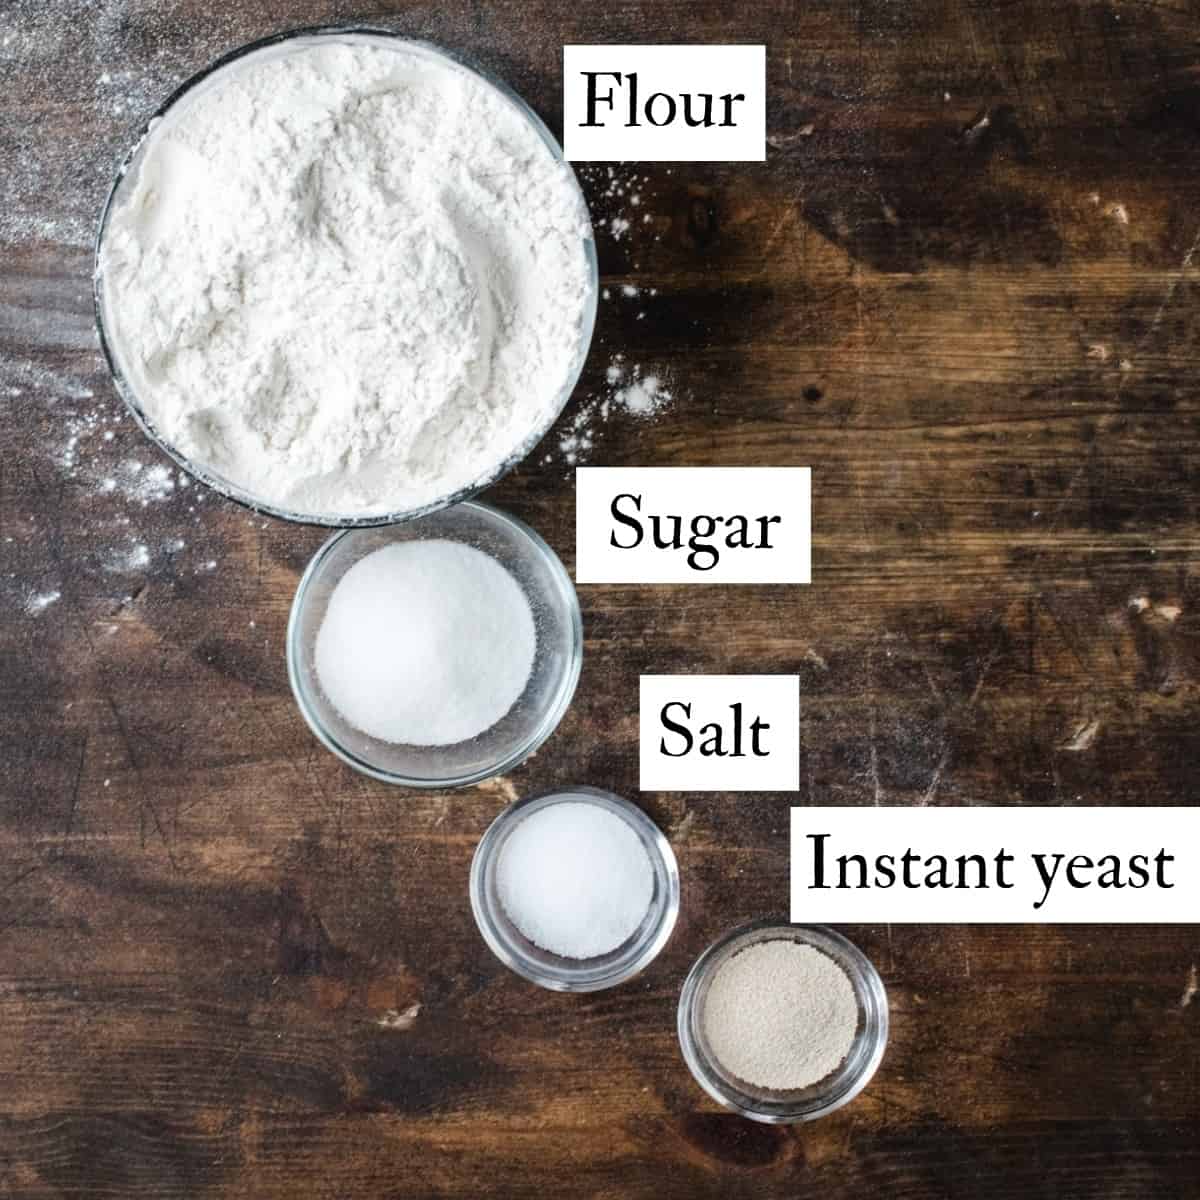 Bowls of flour, sugar, salt and yeast with text labels.